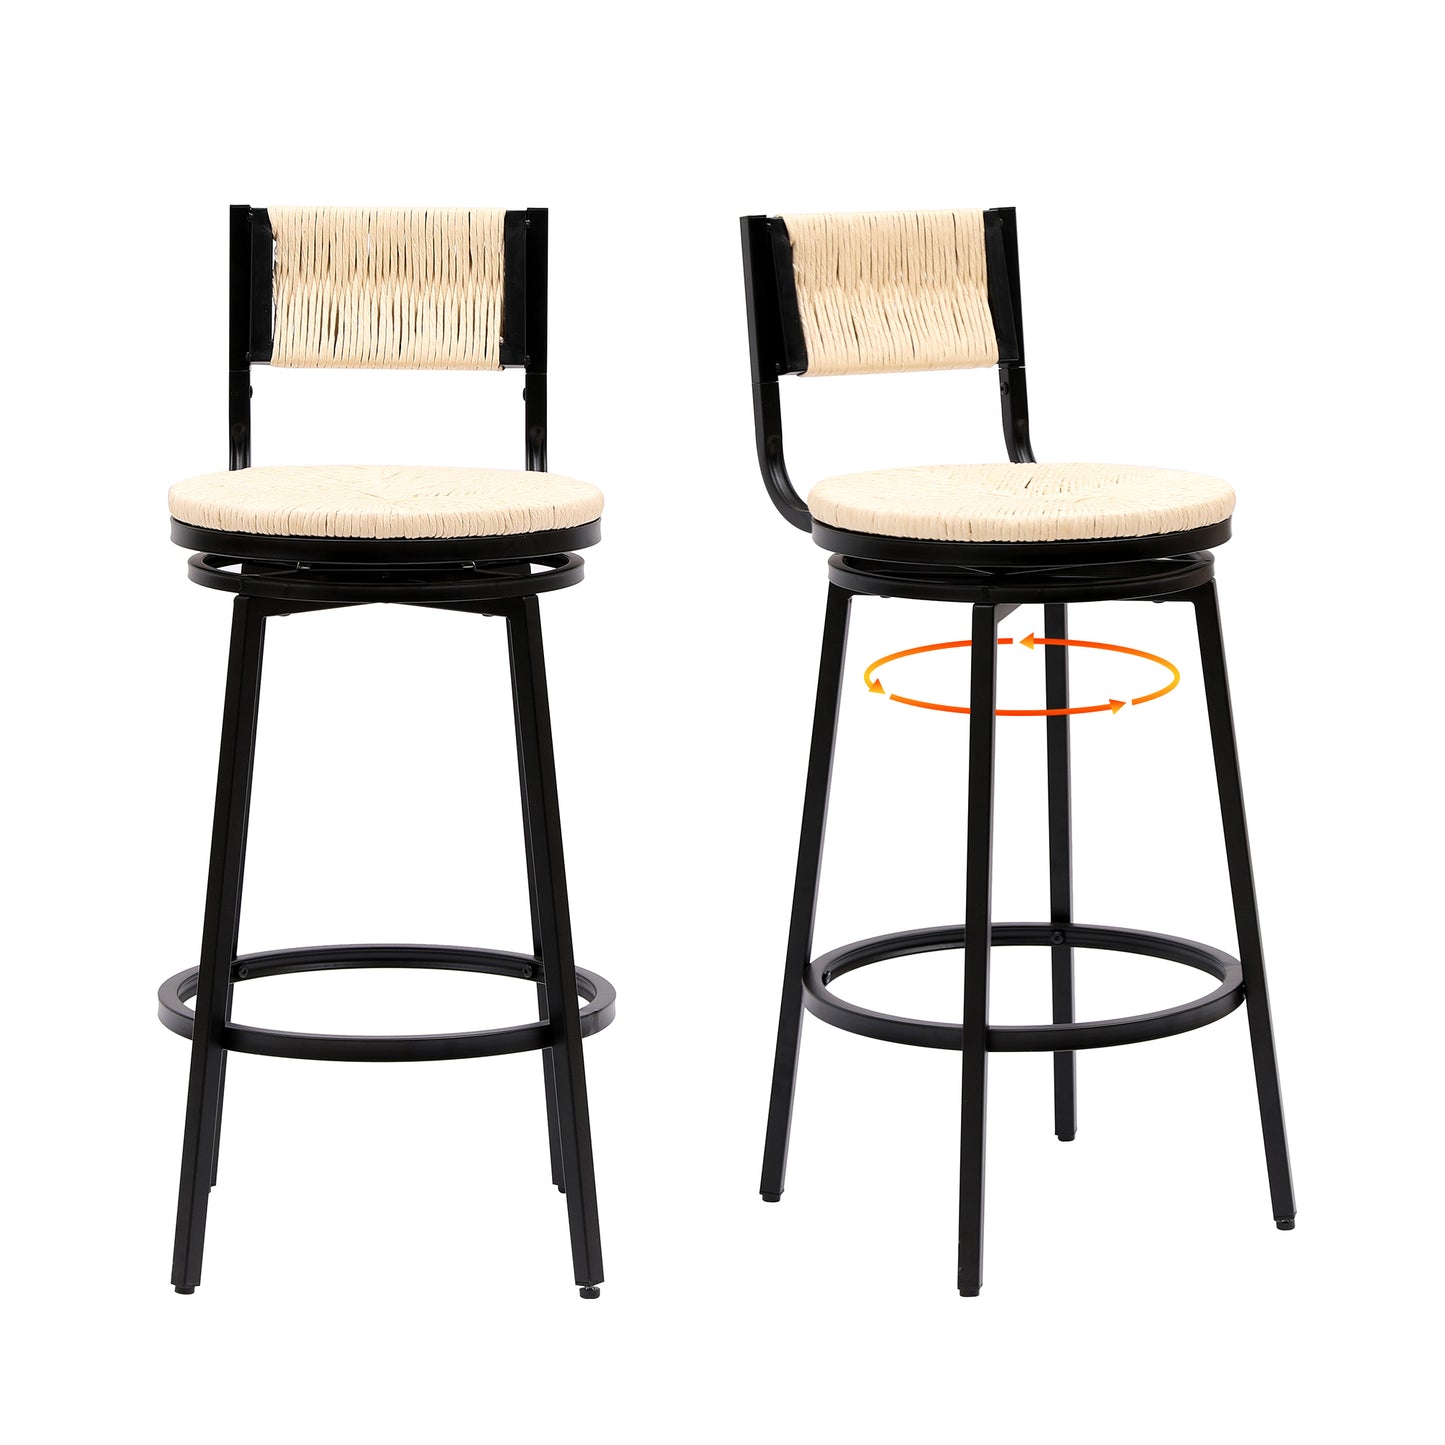 Creamy White Bar Stools Swivel Counter Chairs with Metal Frame Set of 2 Hand Woven Paper Rope Dining Barstools for Kitchen Counter (Creamy White)